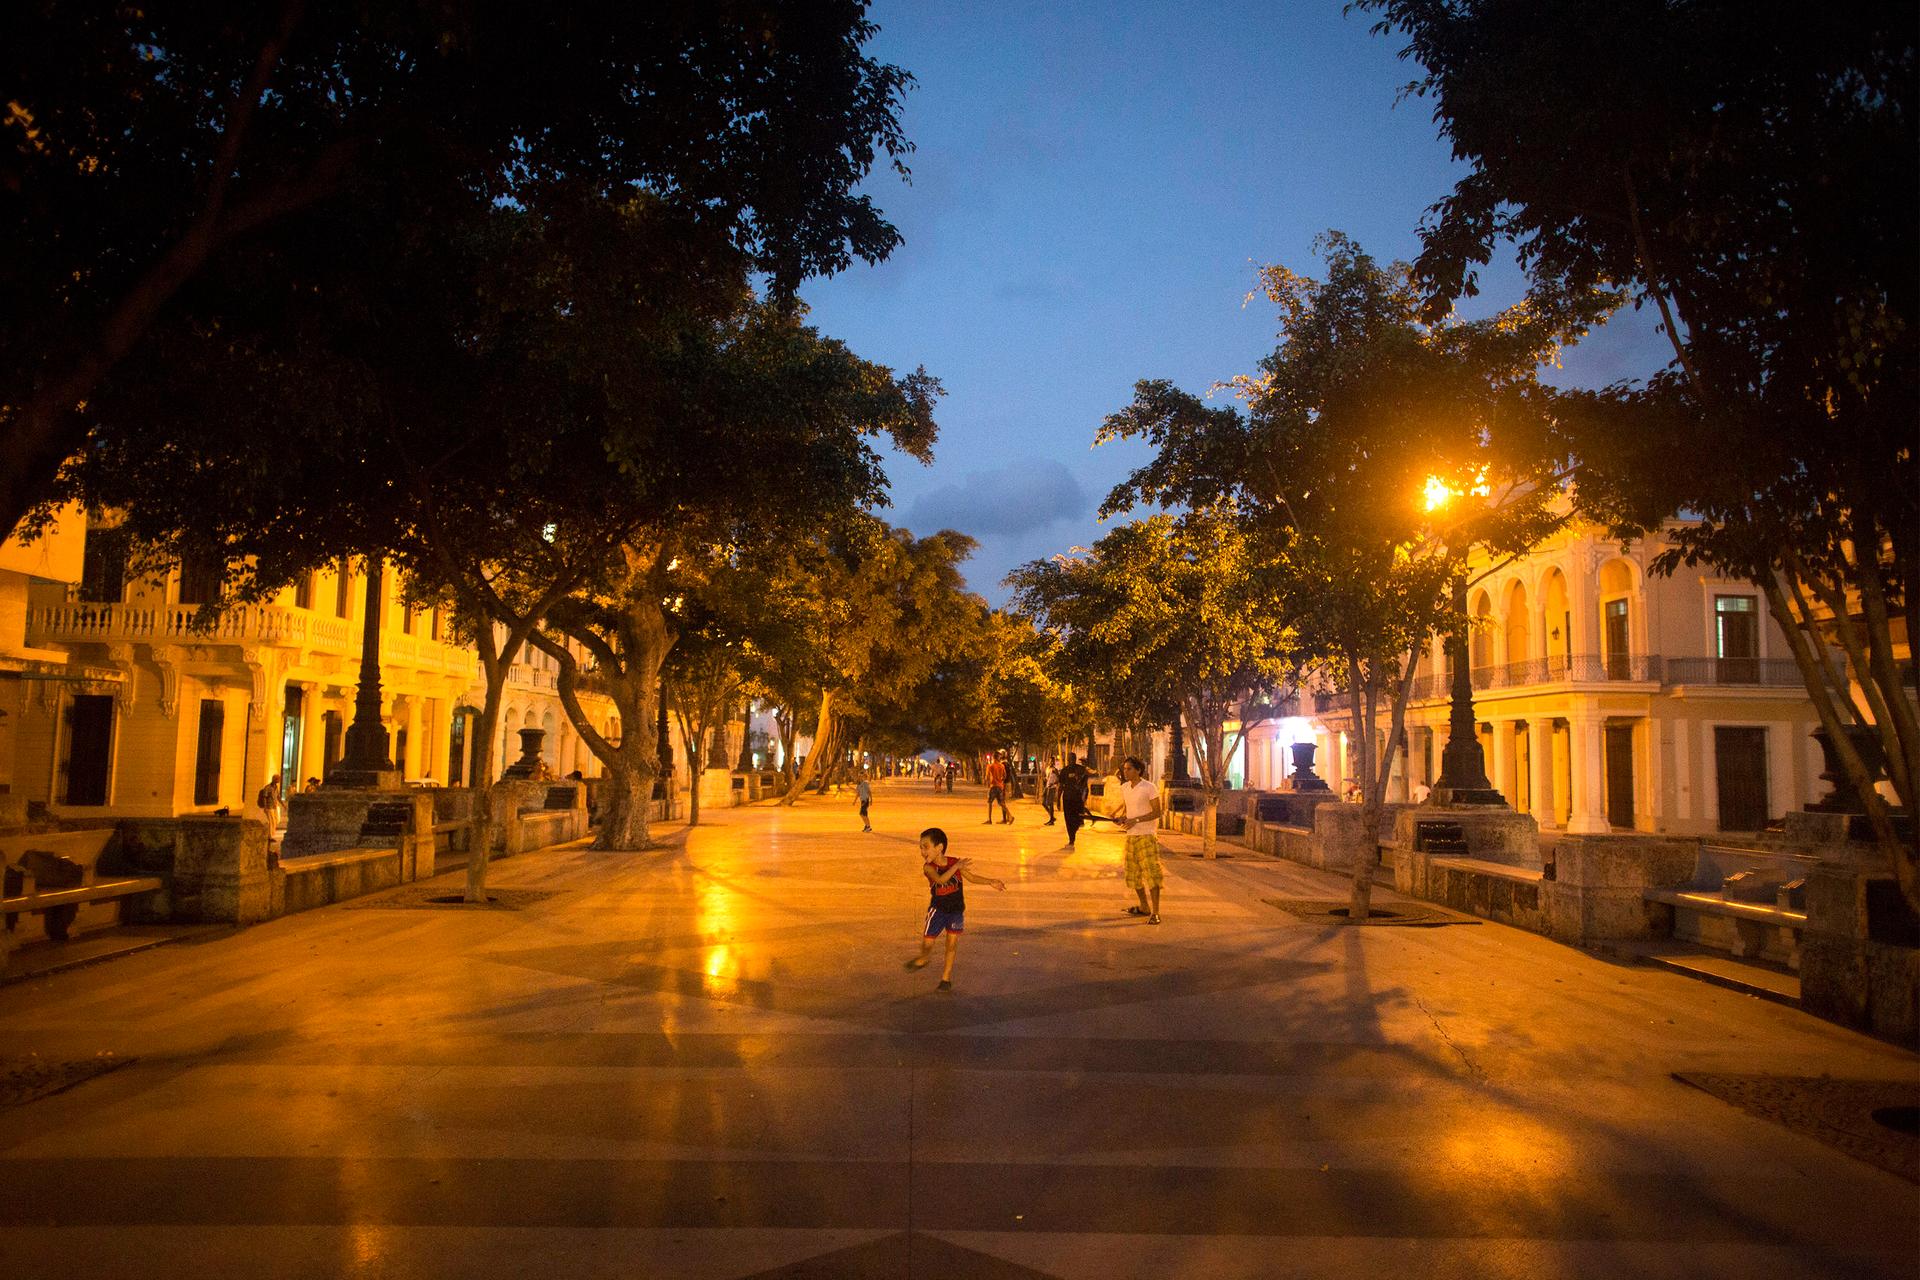 A child plays on Prado Boulevard in the country where President Barack Obama renewed diplomatic relations earlier this year.